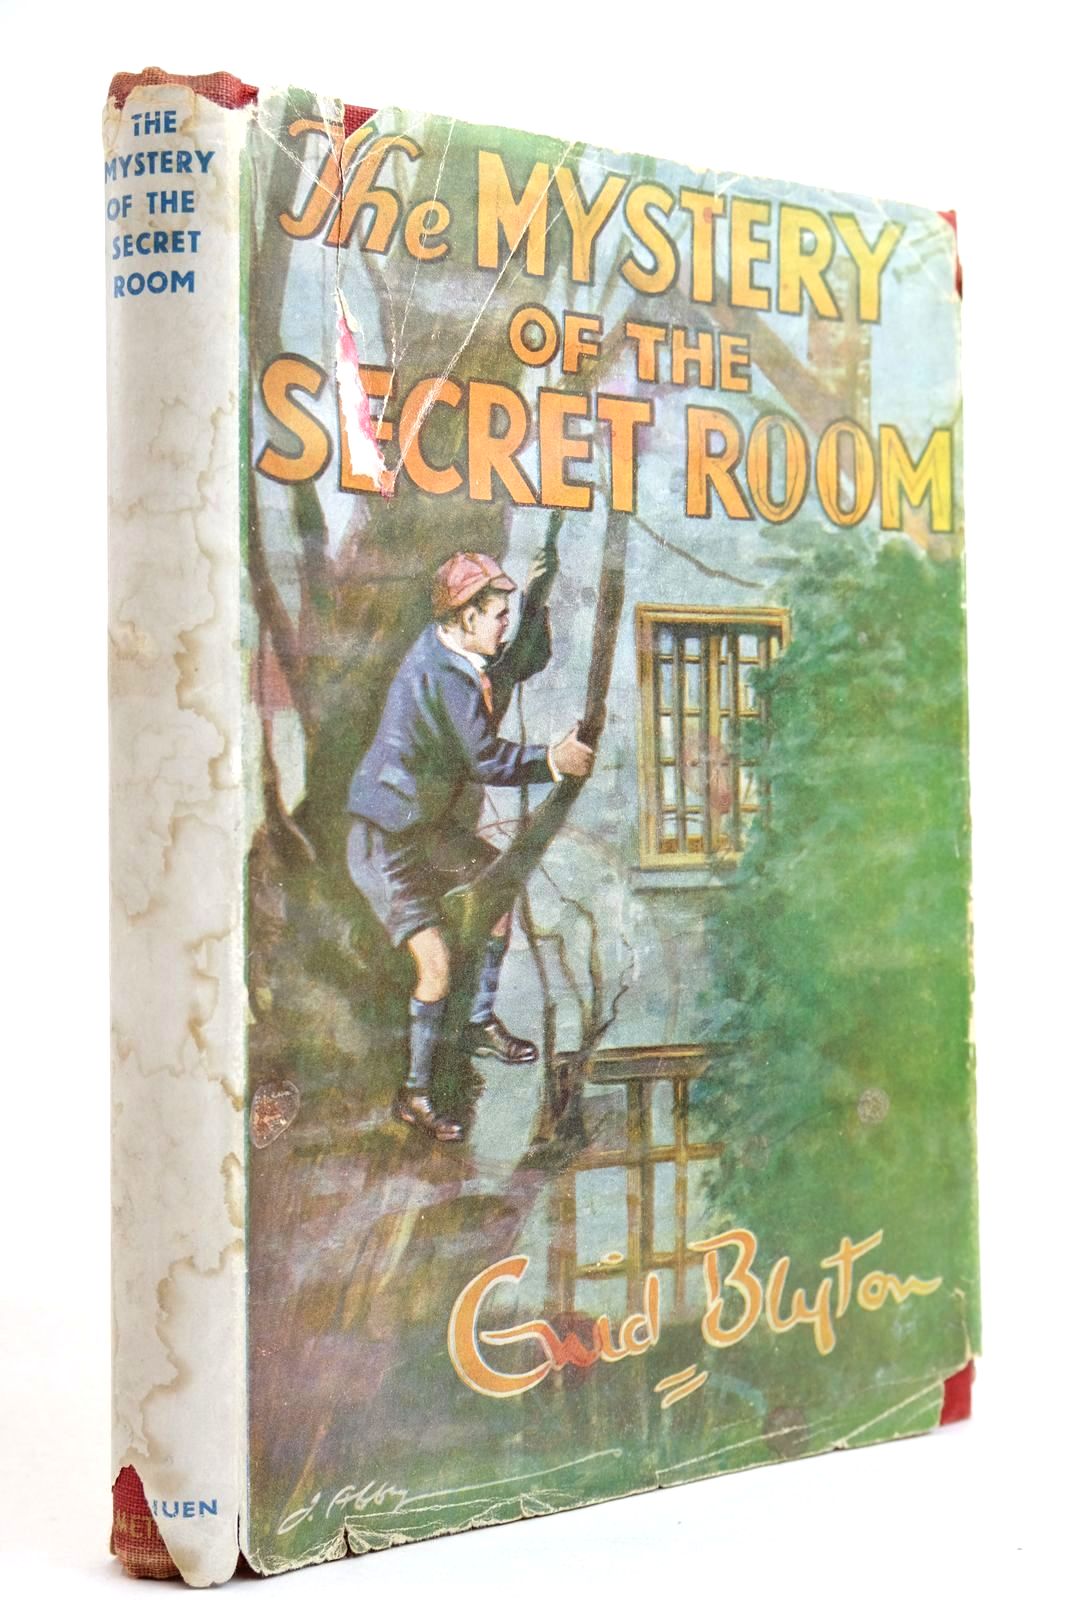 Photo of THE MYSTERY OF THE SECRET ROOM written by Blyton, Enid illustrated by Abbey, J. published by Methuen &amp; Co. Ltd. (STOCK CODE: 2134316)  for sale by Stella & Rose's Books